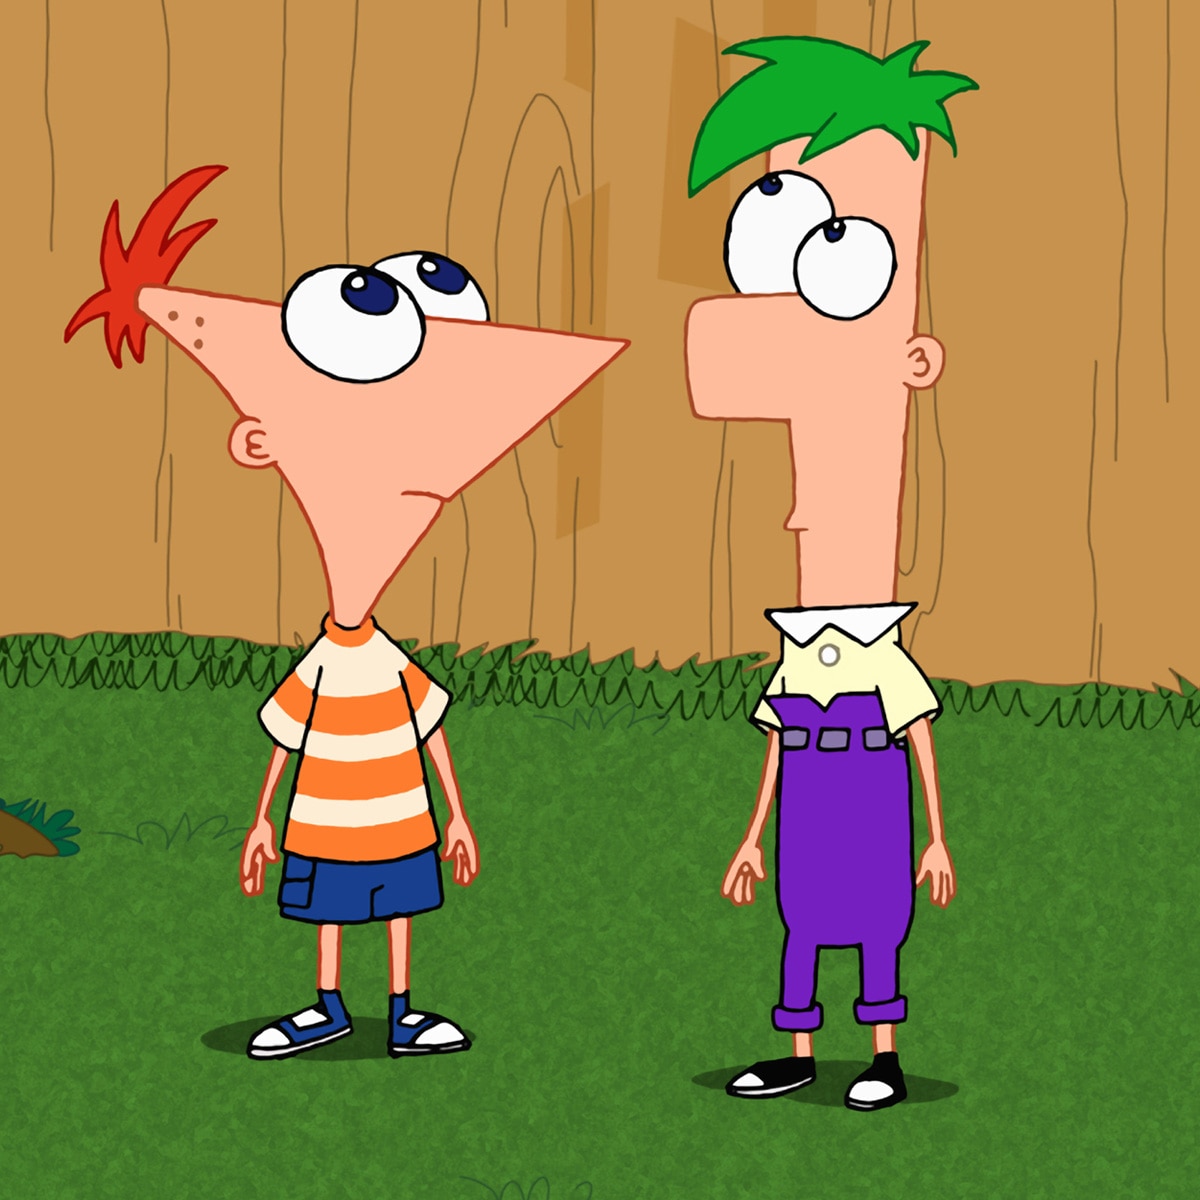 Phineas and Ferb, Disney Channel